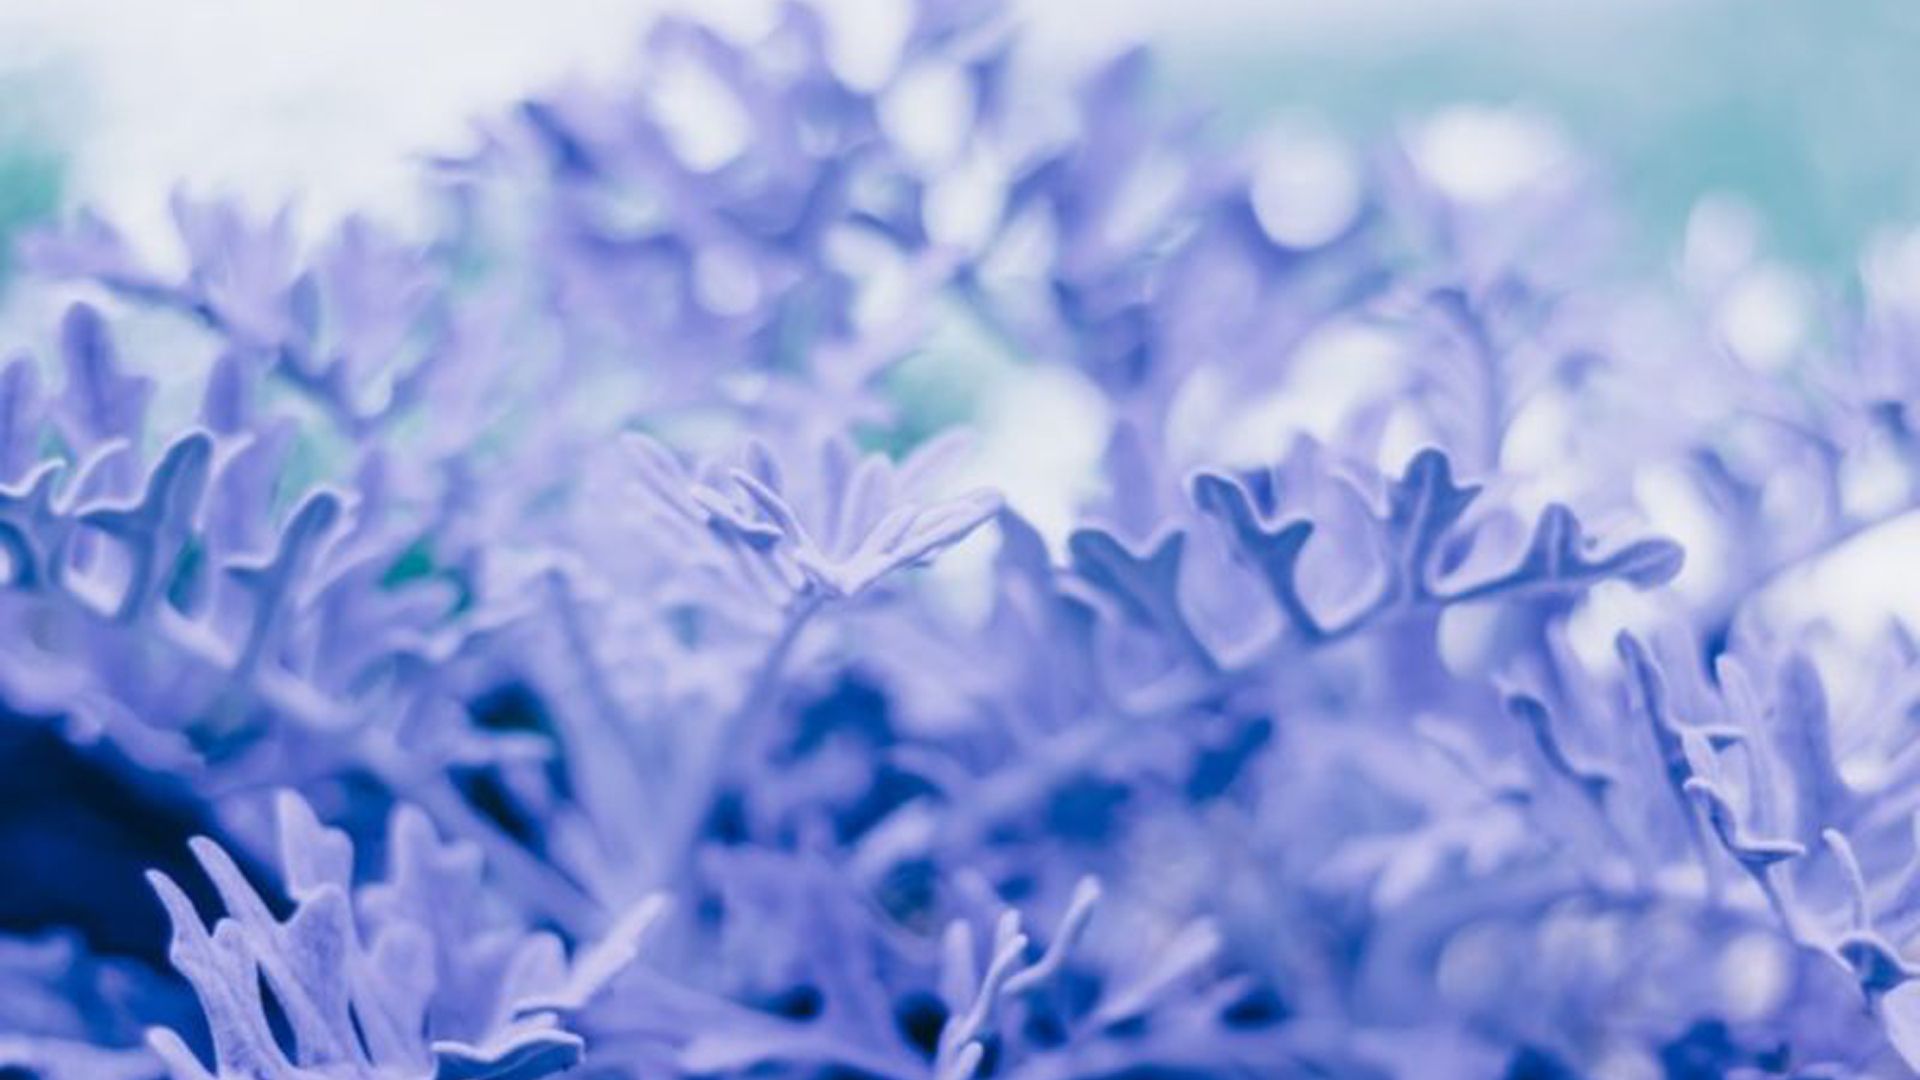 A close up of blue flowers - Snowflake